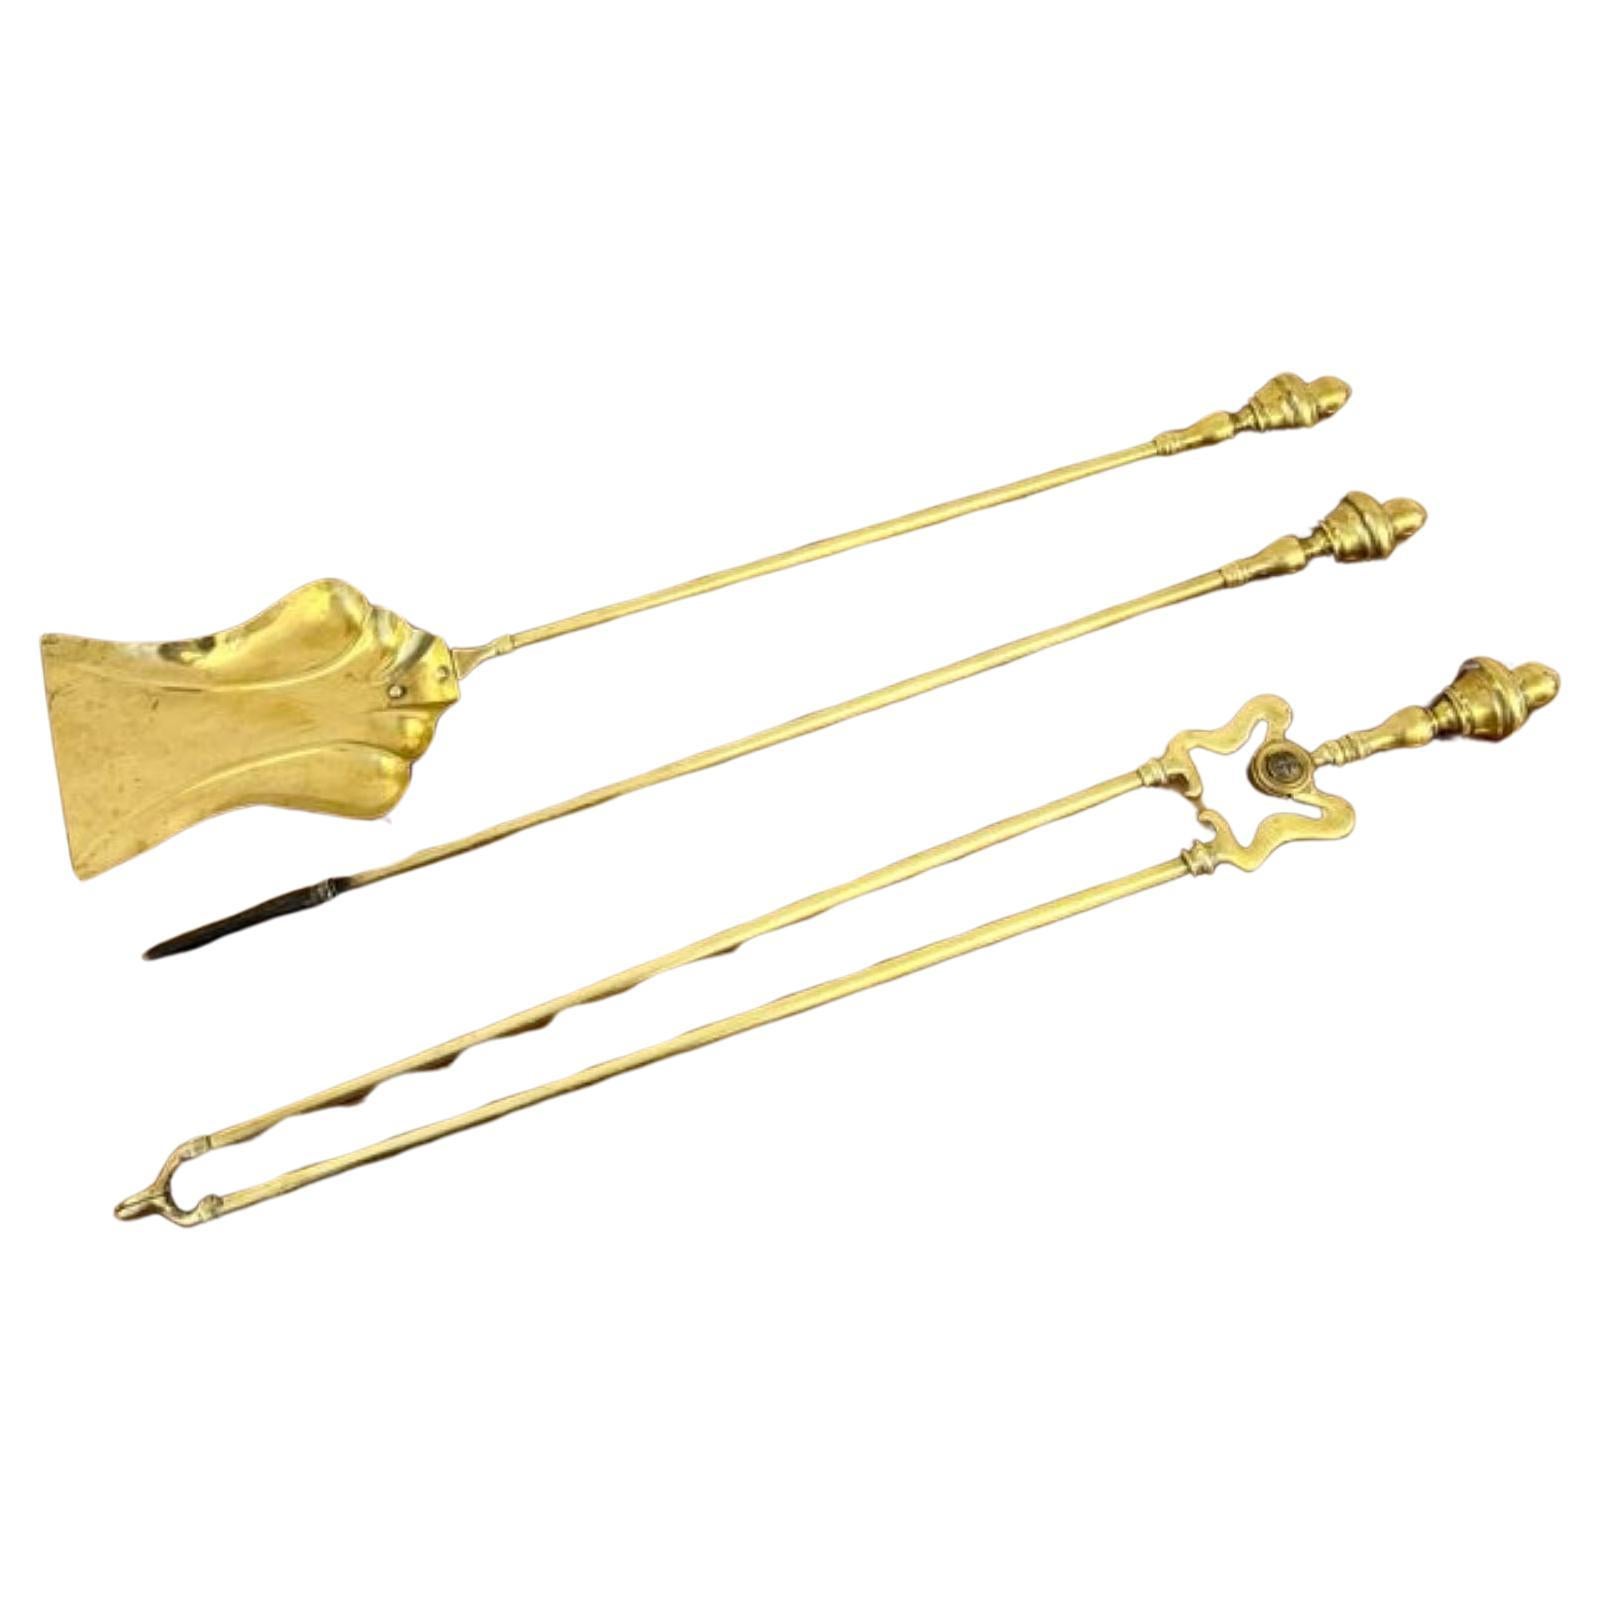 Lovely set of antique Victorian quality brass fire irons For Sale